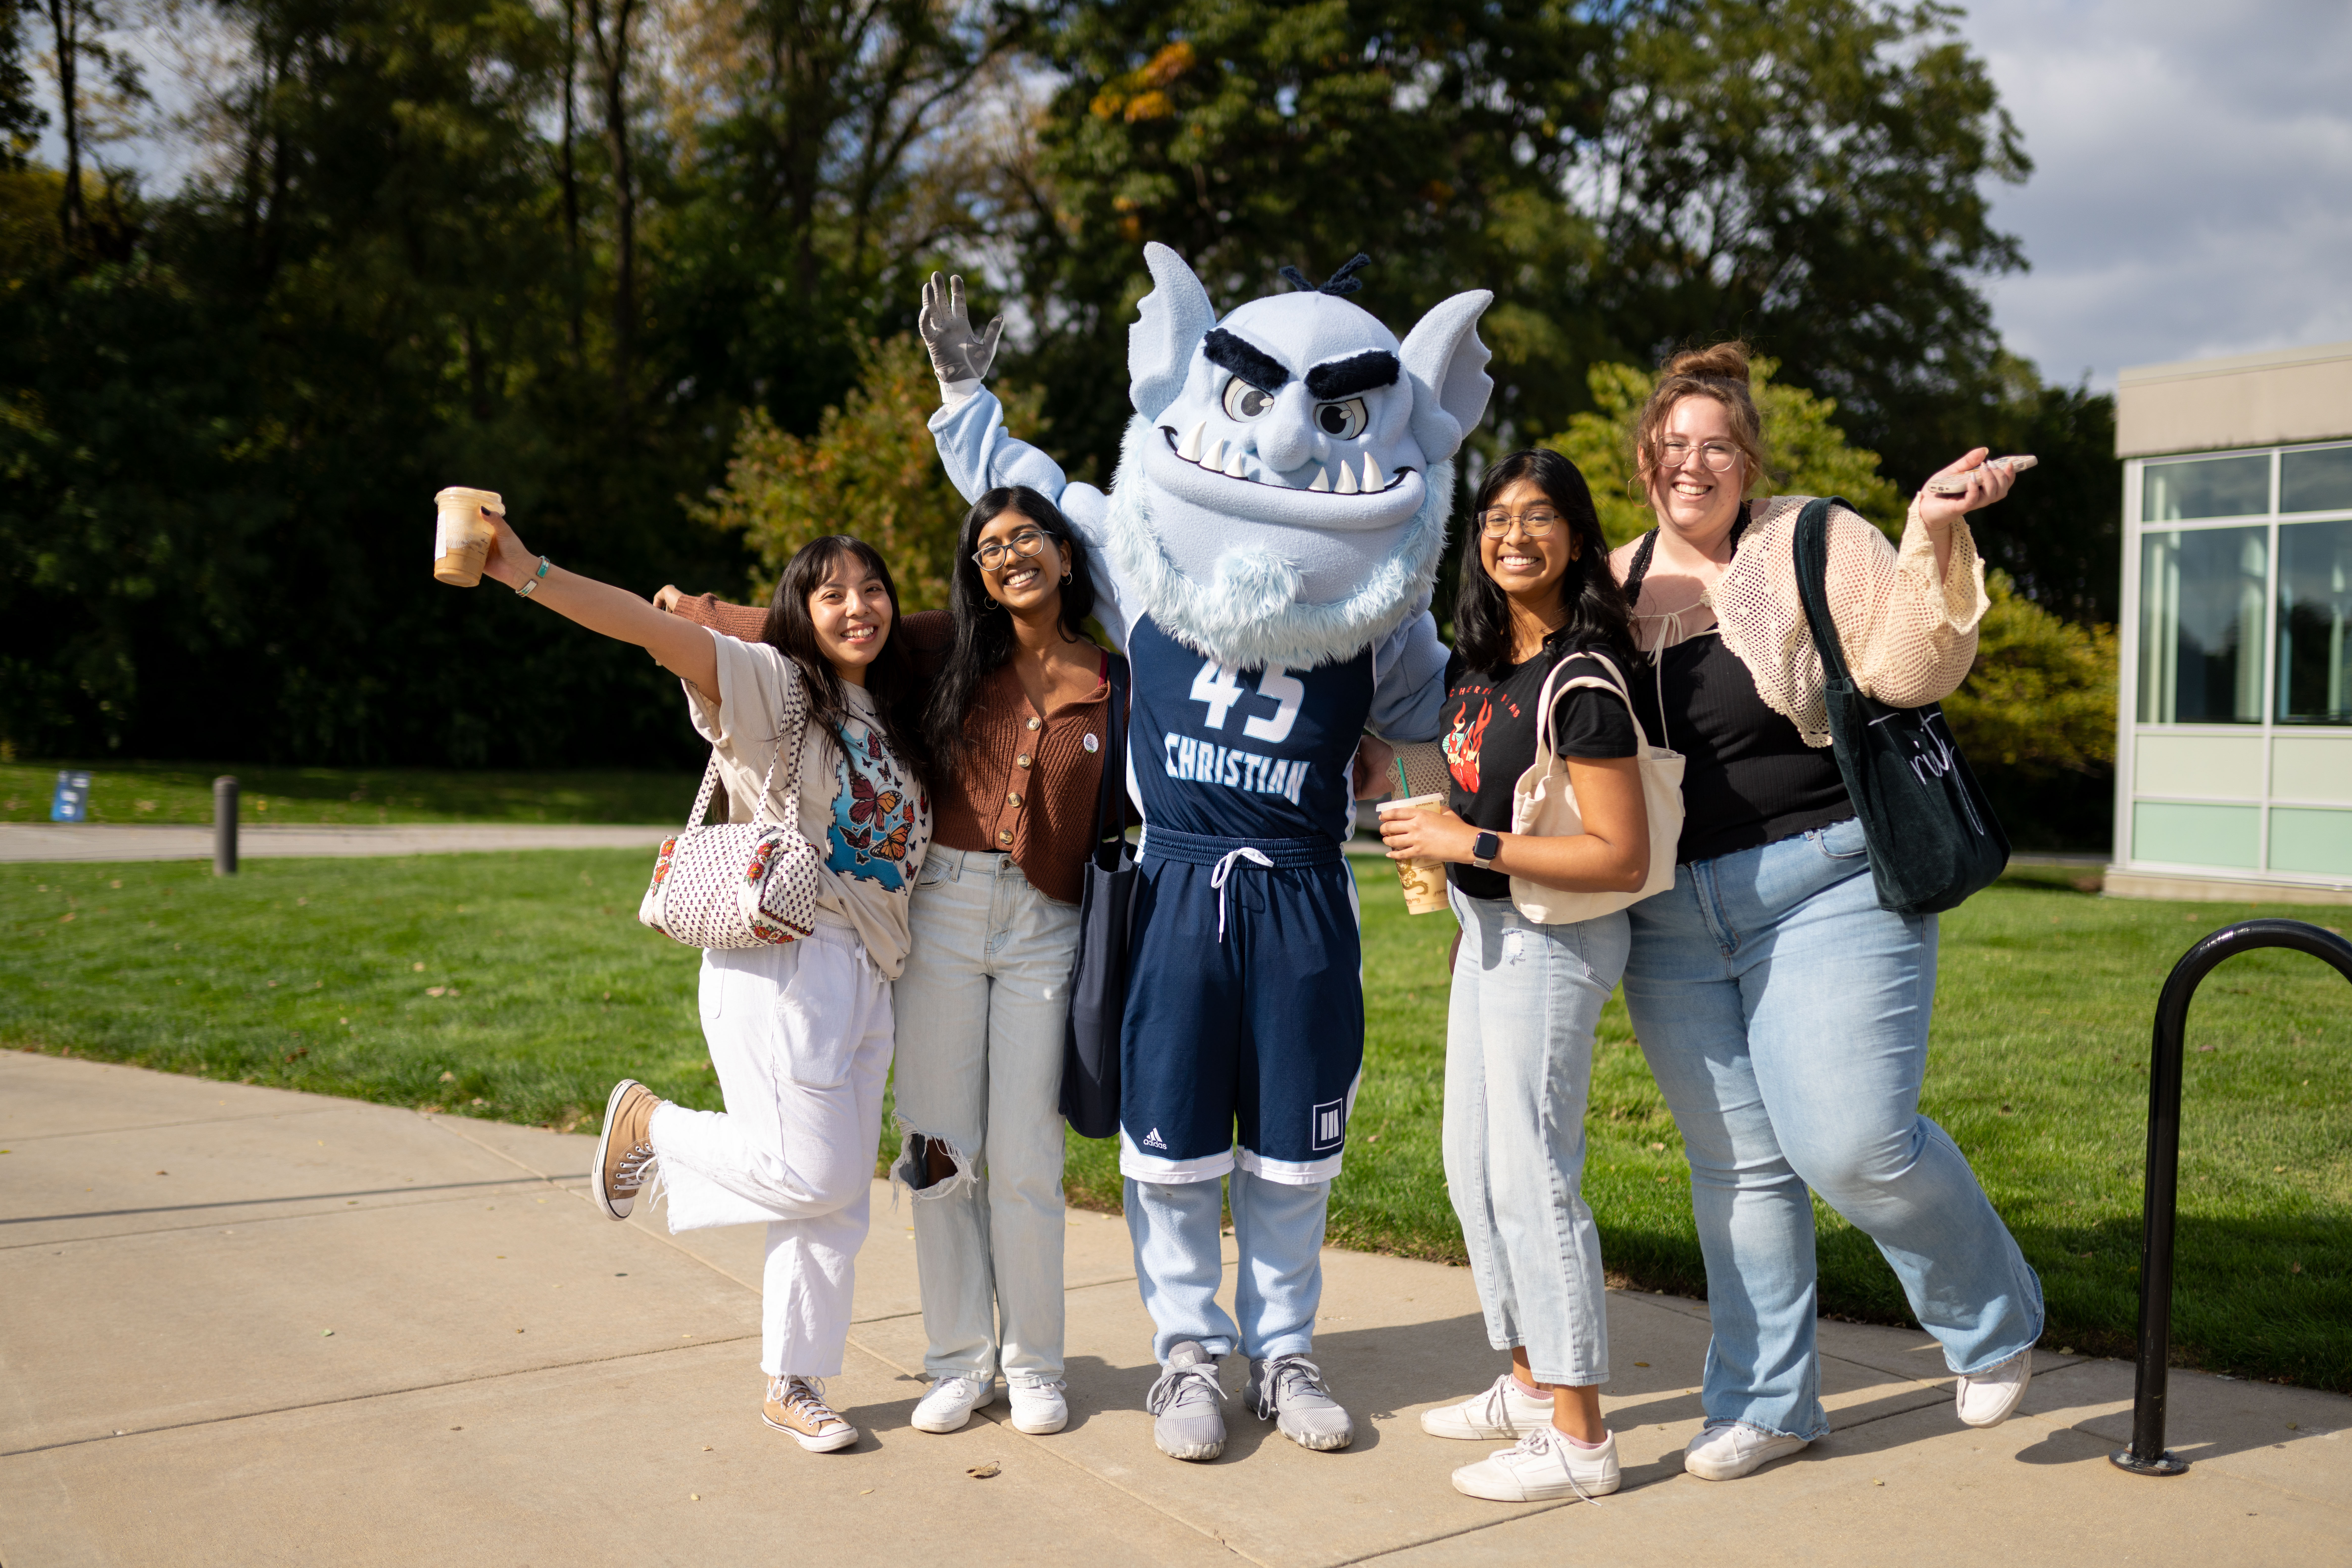 Each year, Trinity Christian College hosts its annual Fall Fest. Students, faculty, staff, and families come together to celebrate all of the blessings and opportunities that are present here at Trinity.